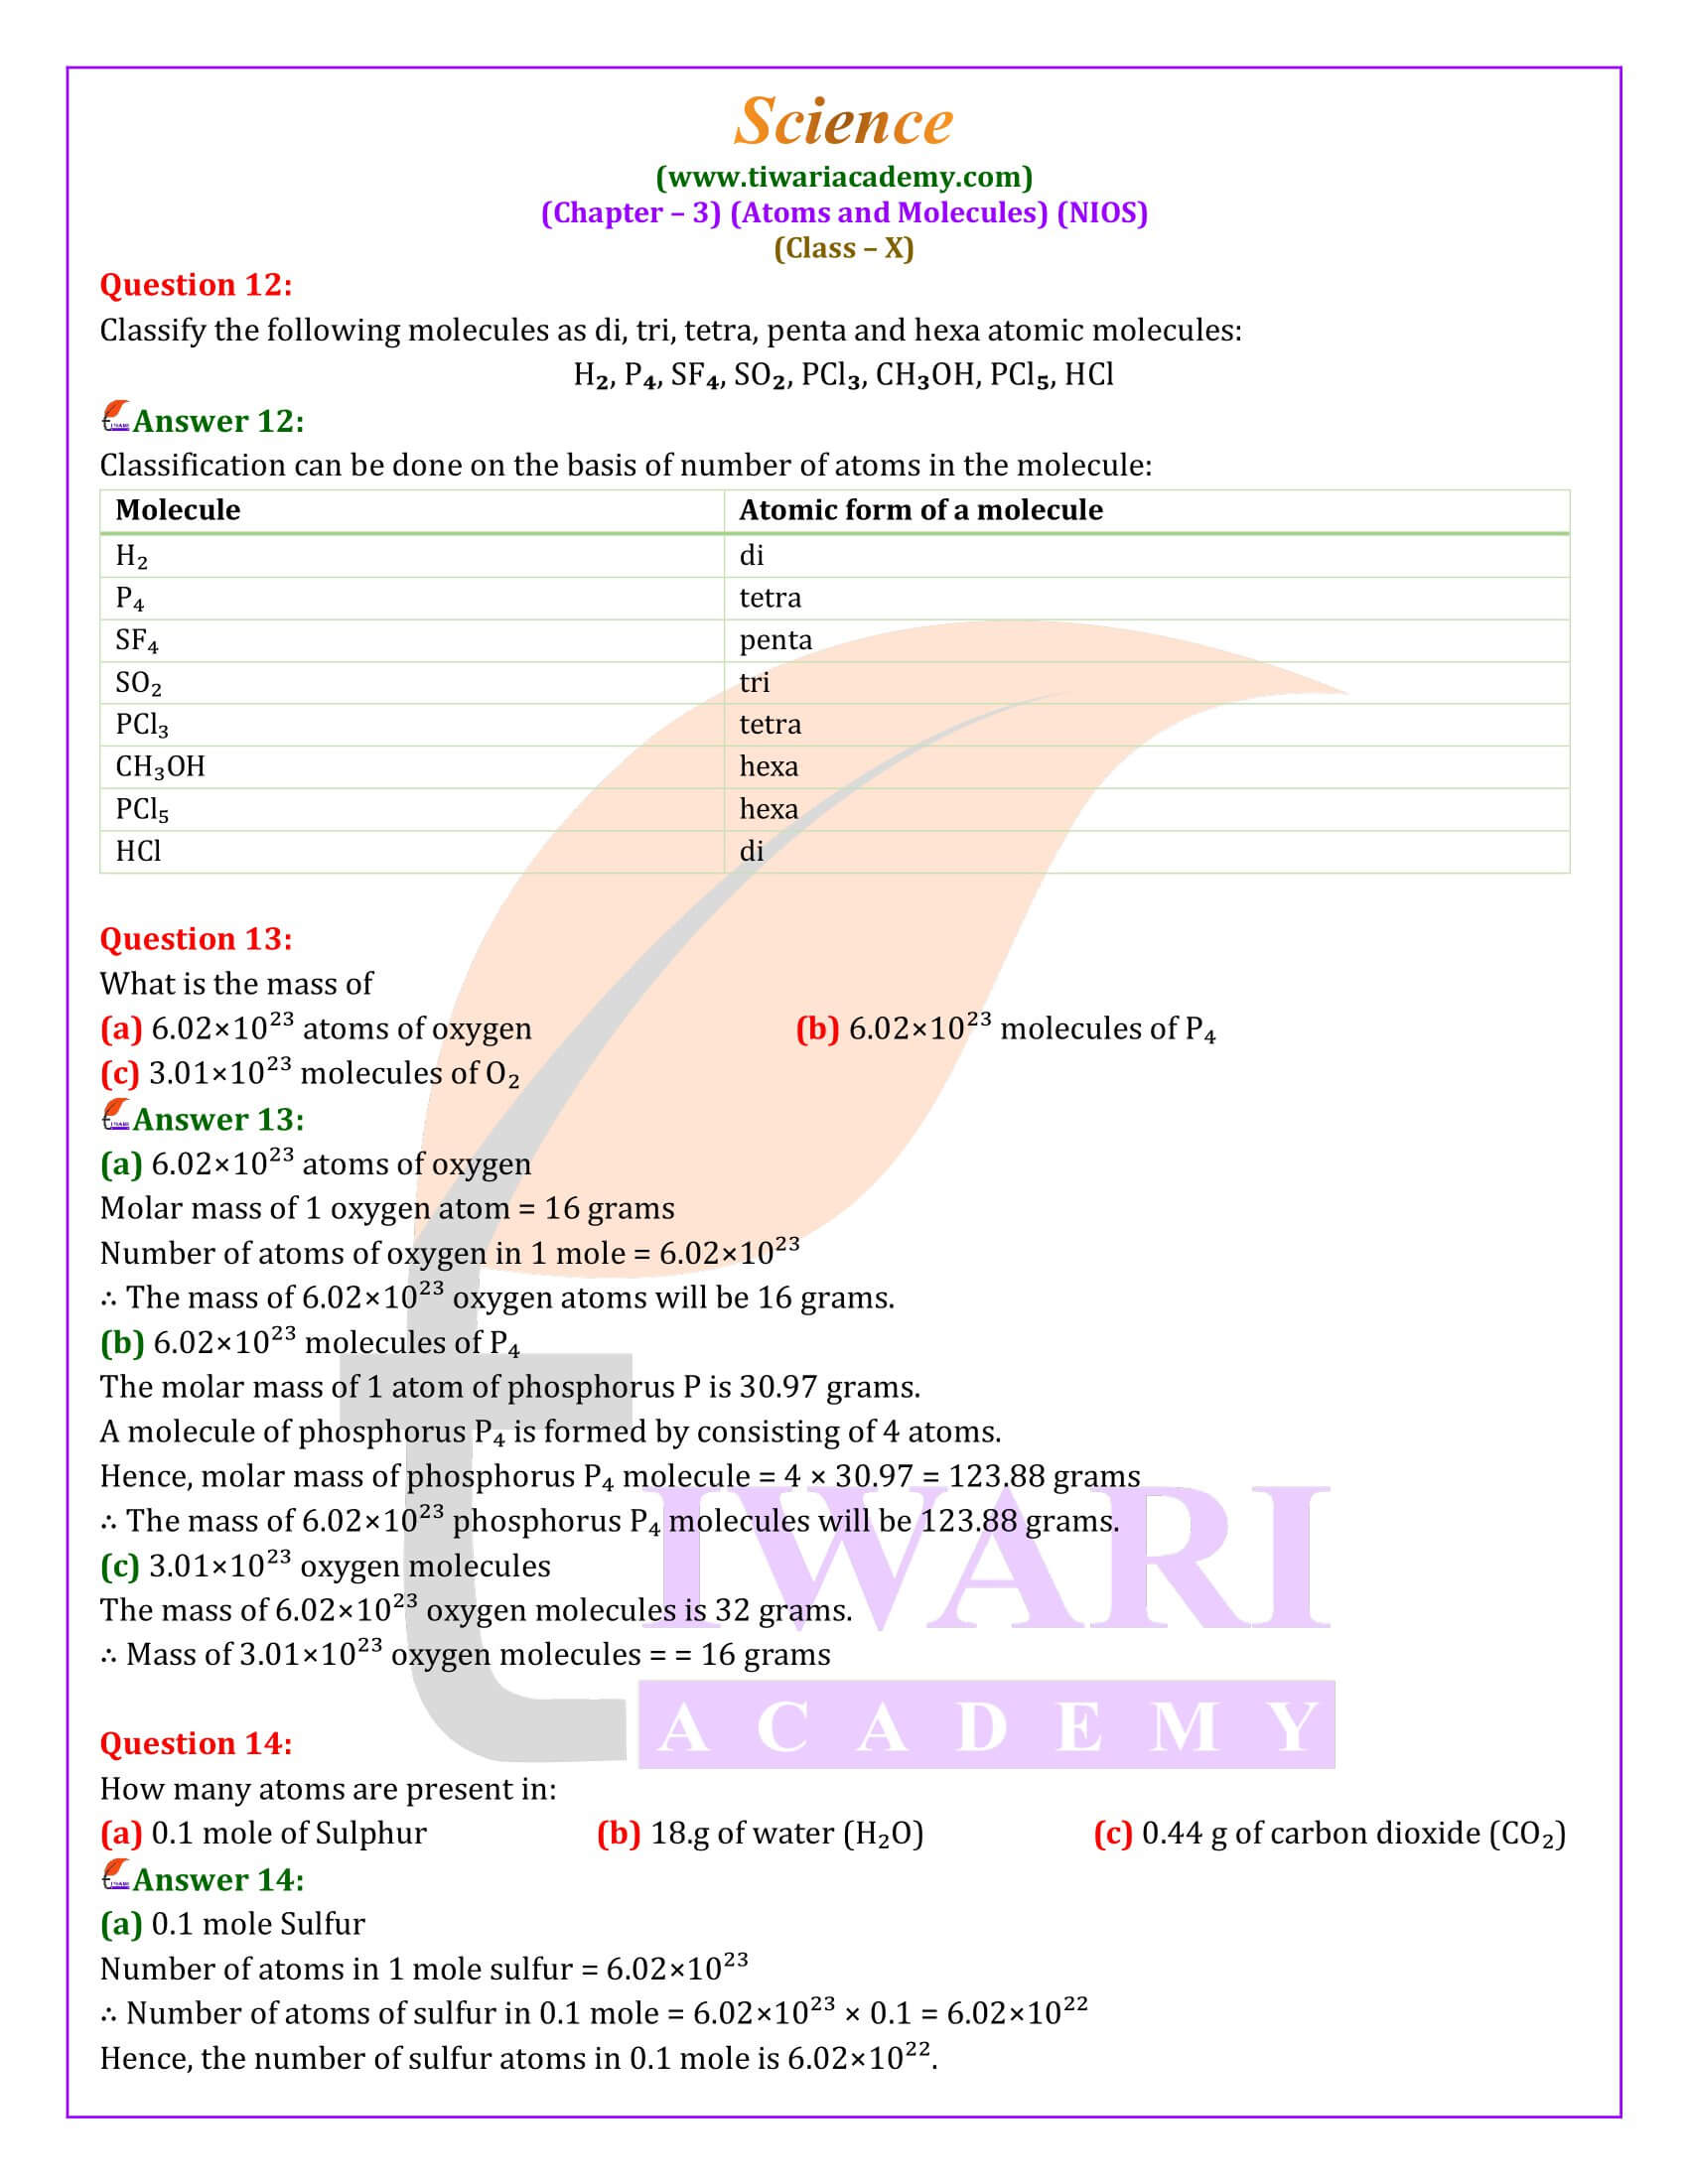 NIOS Class 10 Science Chapter 3 Exercises